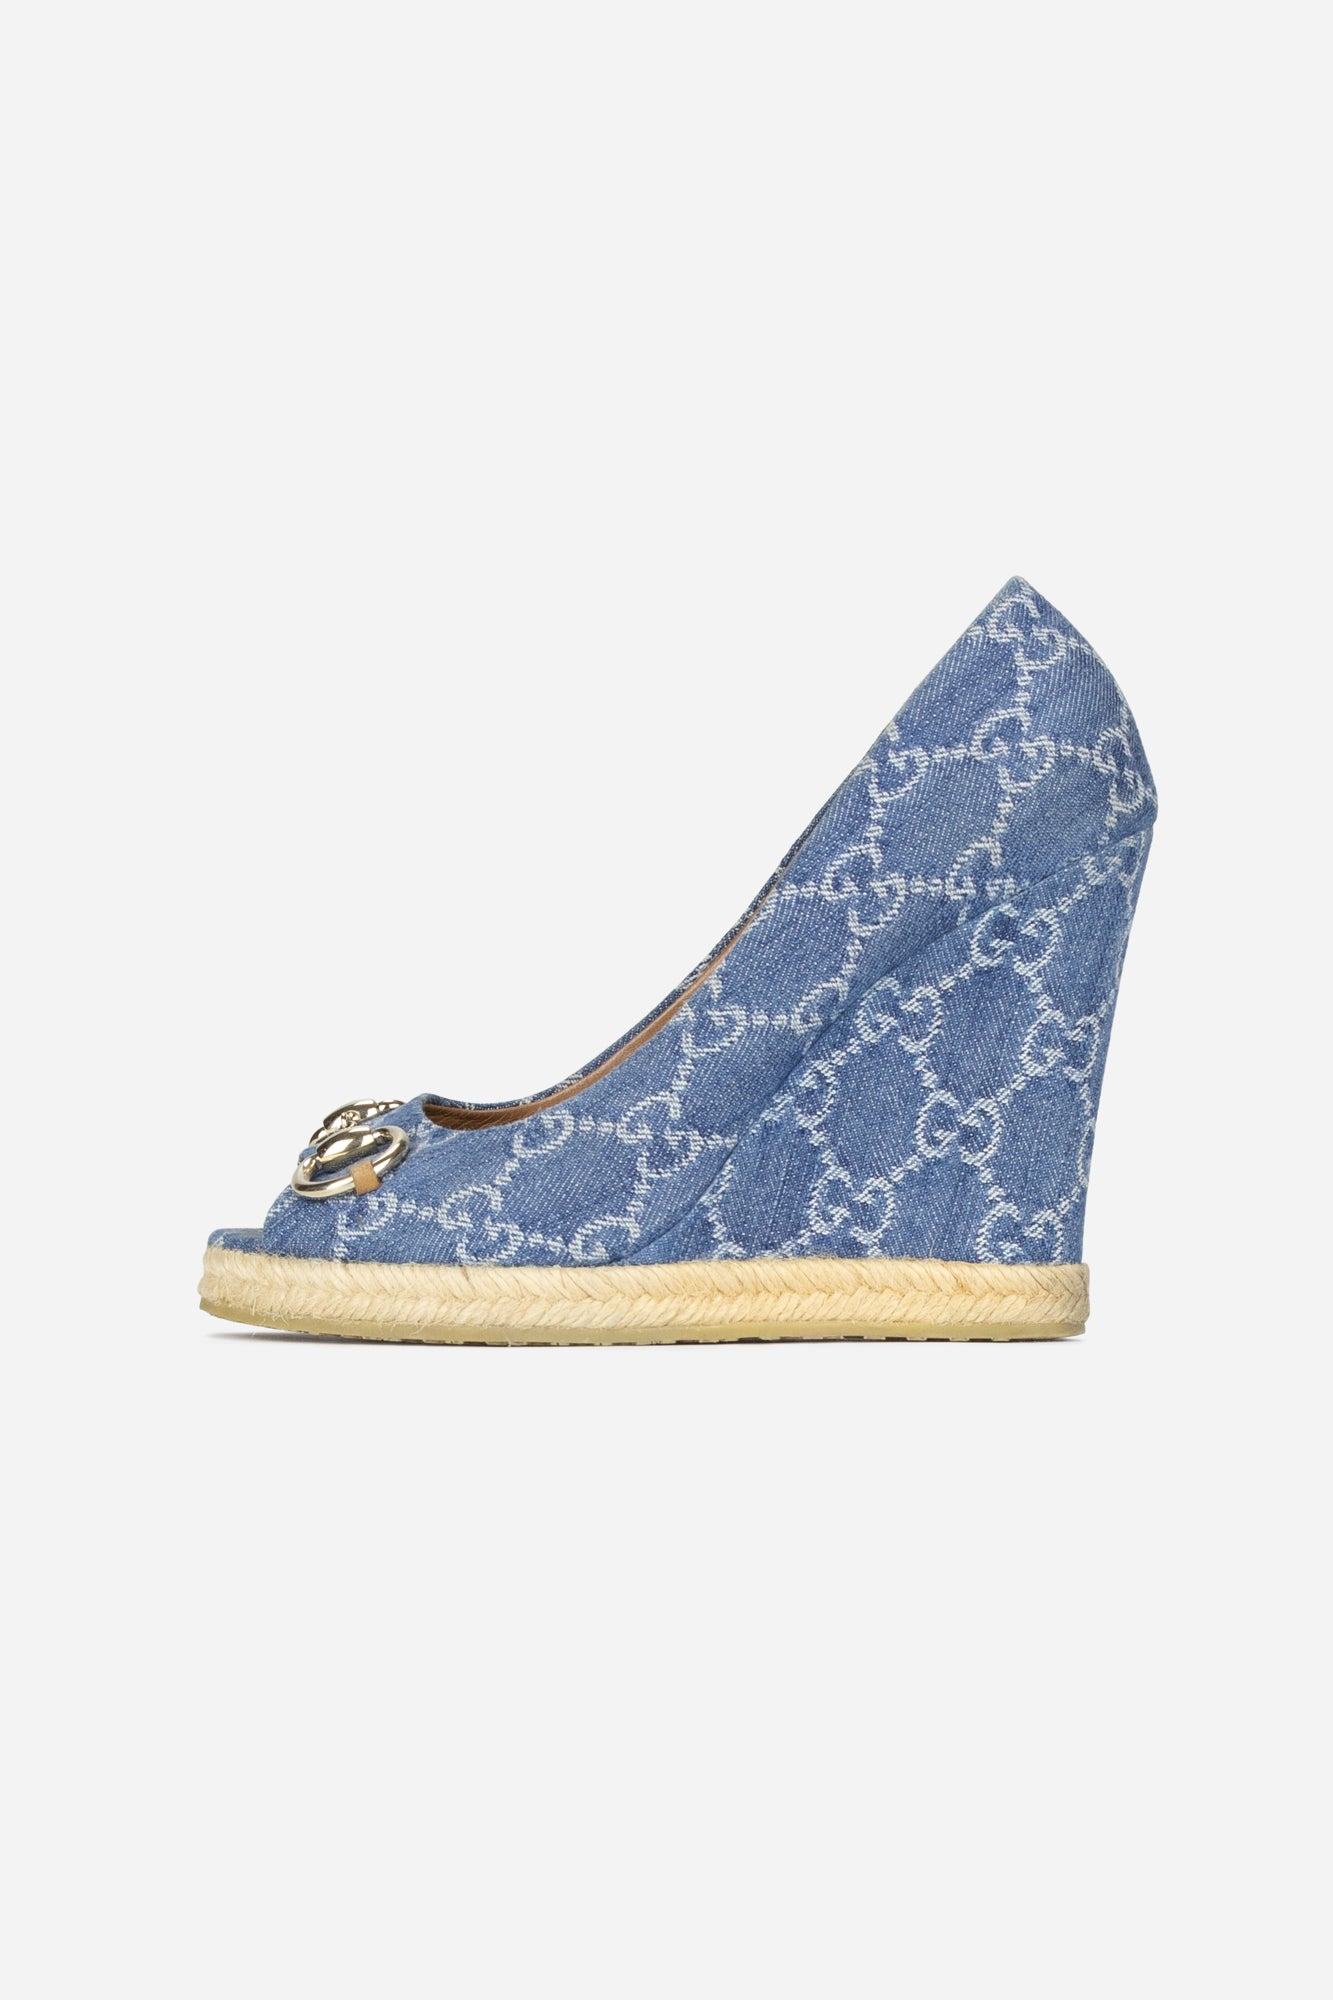 Blue Denim GG Wedge Sandals - So Over It Luxury Consignment